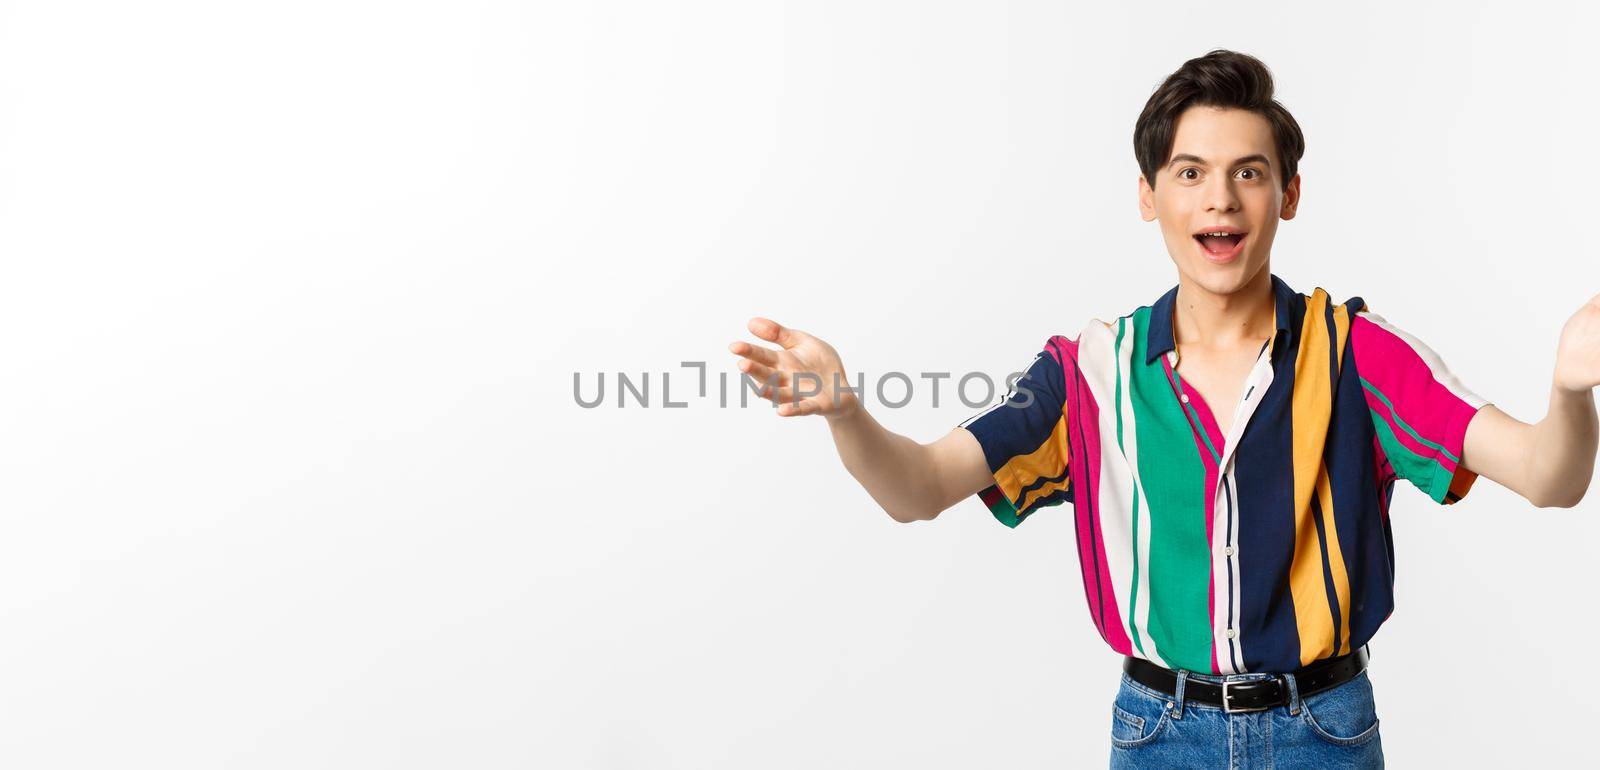 Amazed young handsome man reaching hands forward, want to hold or take something, looking with desire, standing over white background.